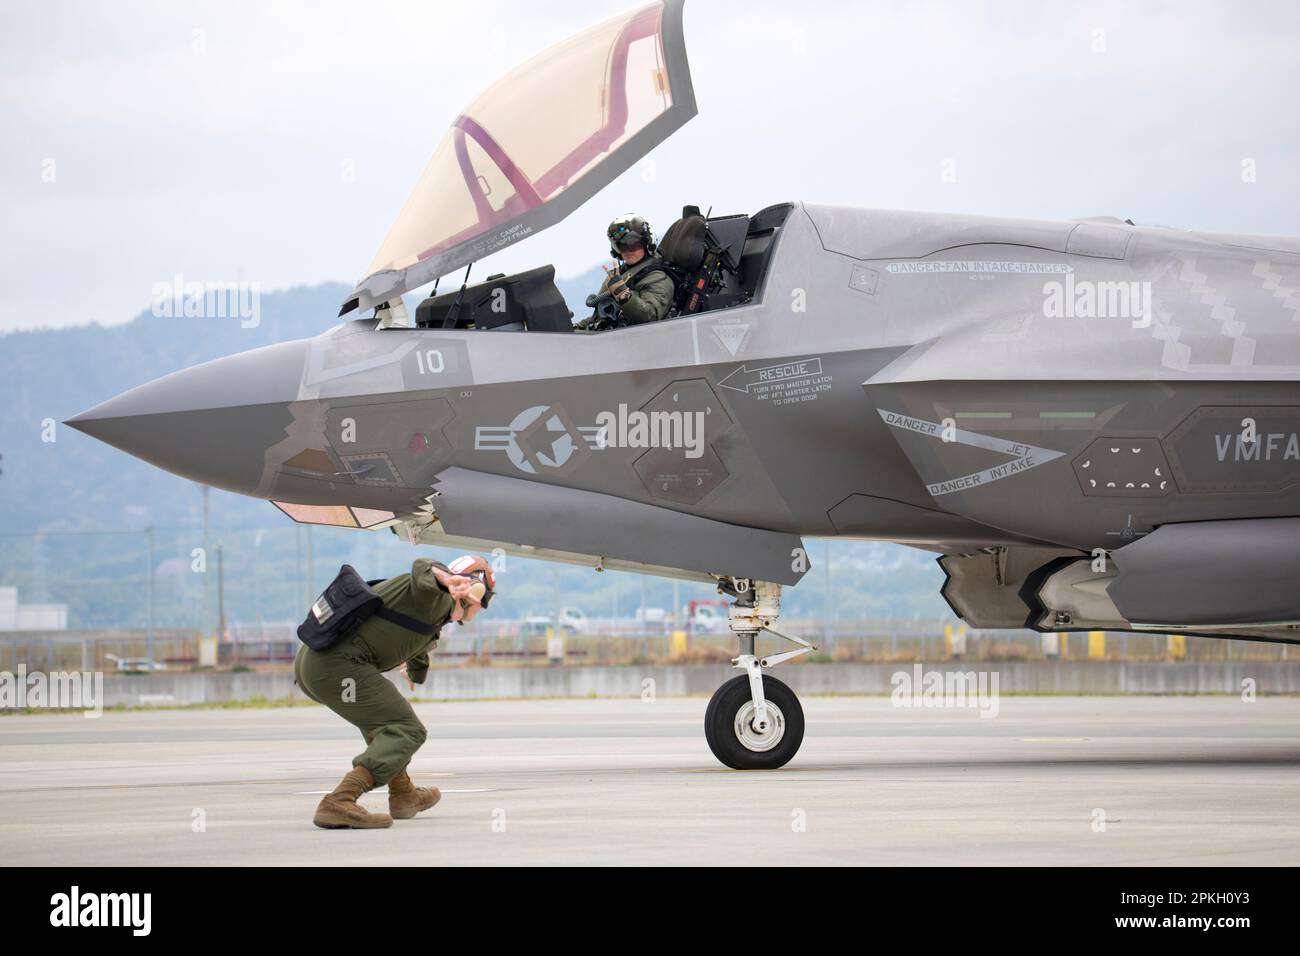 U.S. Marine Corps Lance Cpl. Herbert Tunley III, a fixed wing aircraft mechanic, signals to Maj. Douglas Kansier, F-35B Lightning II aircraft pilot and executive officer of Marine Fighter Attack Squadron (VMFA) 242 at Marine Corps Air Station Iwakuni, Japan, April 5, 2023. Marines with Marine Aircraft Group 12 routinely conduct arming, expeditionary refueling and flight operations to maintain proficiency and readiness in support of a free and open Indo-Pacific. (U.S. Marine Corps photo by Cpl. Tyler Harmon) Stock Photo